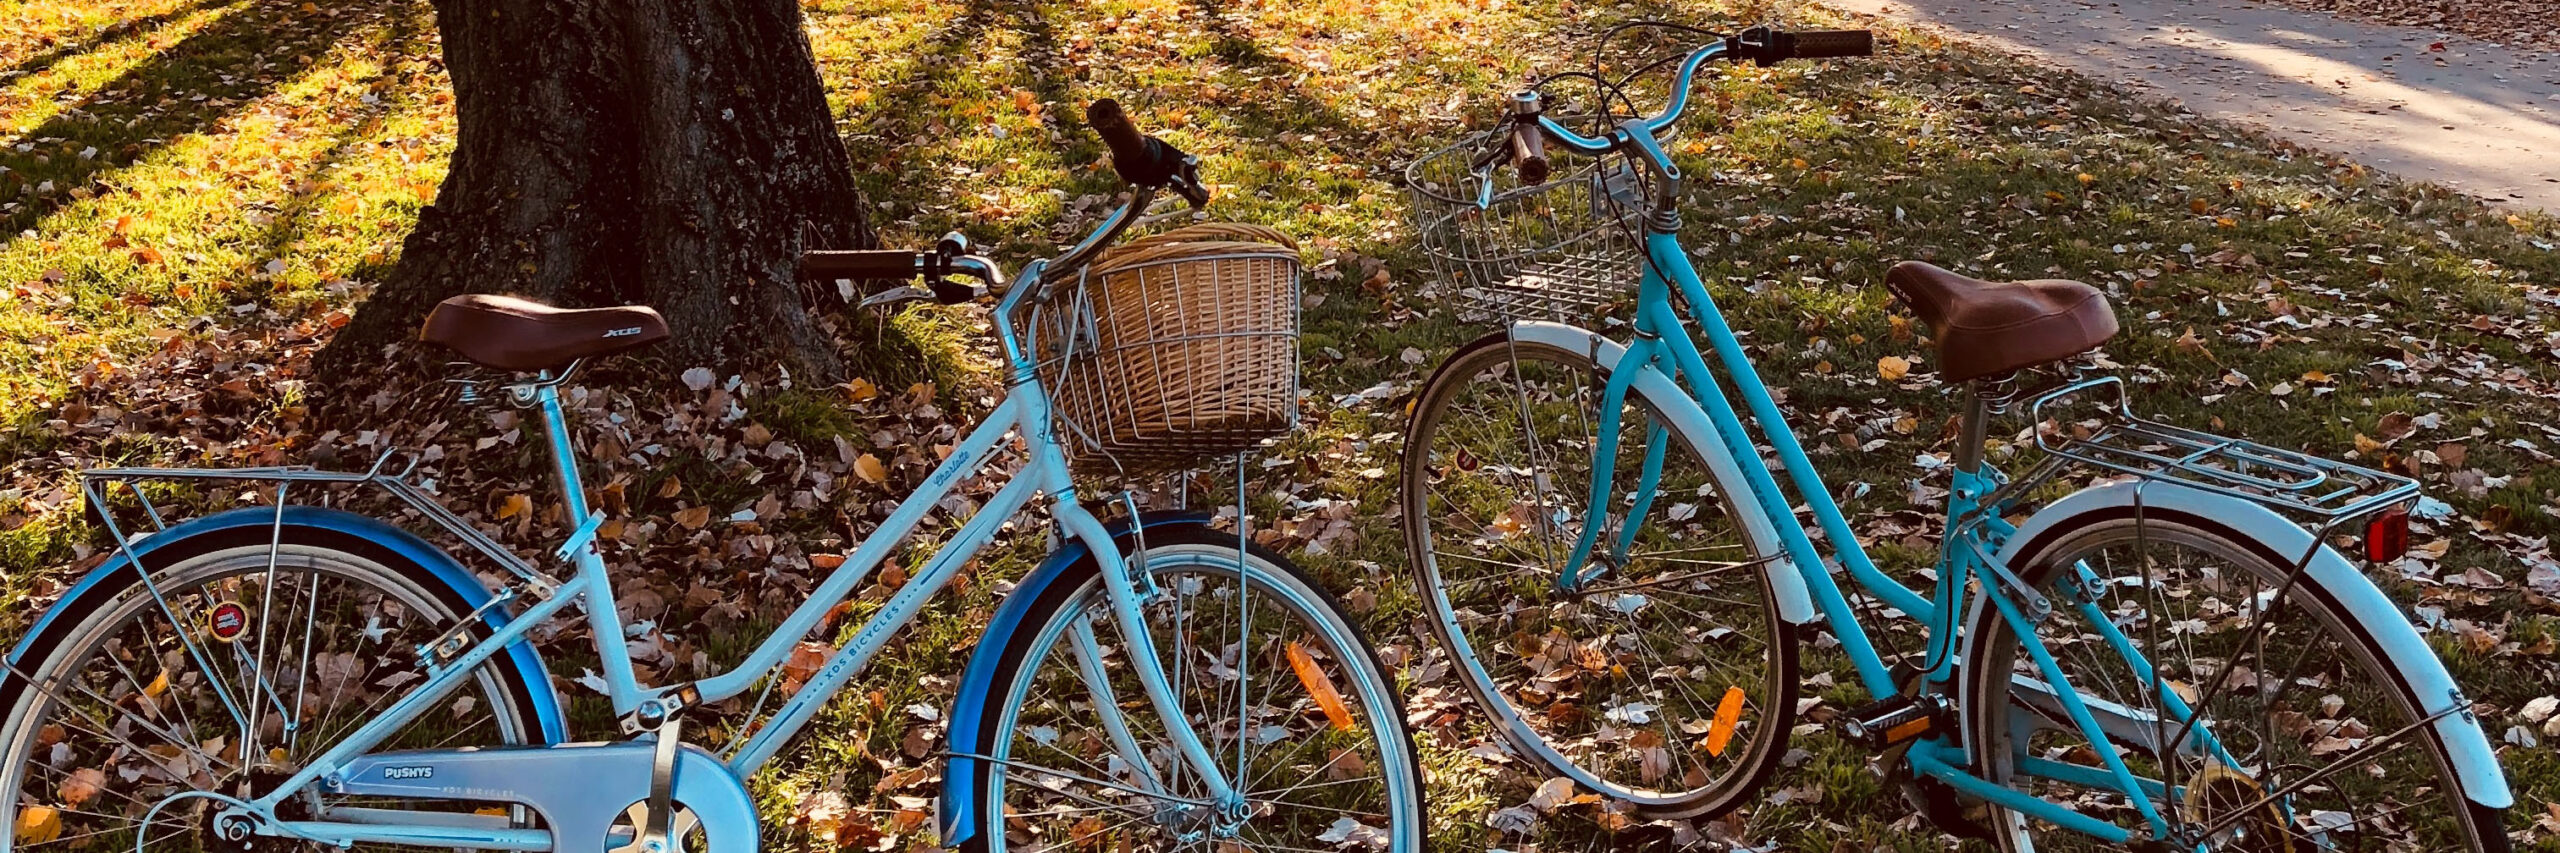 bicycles in front of tree